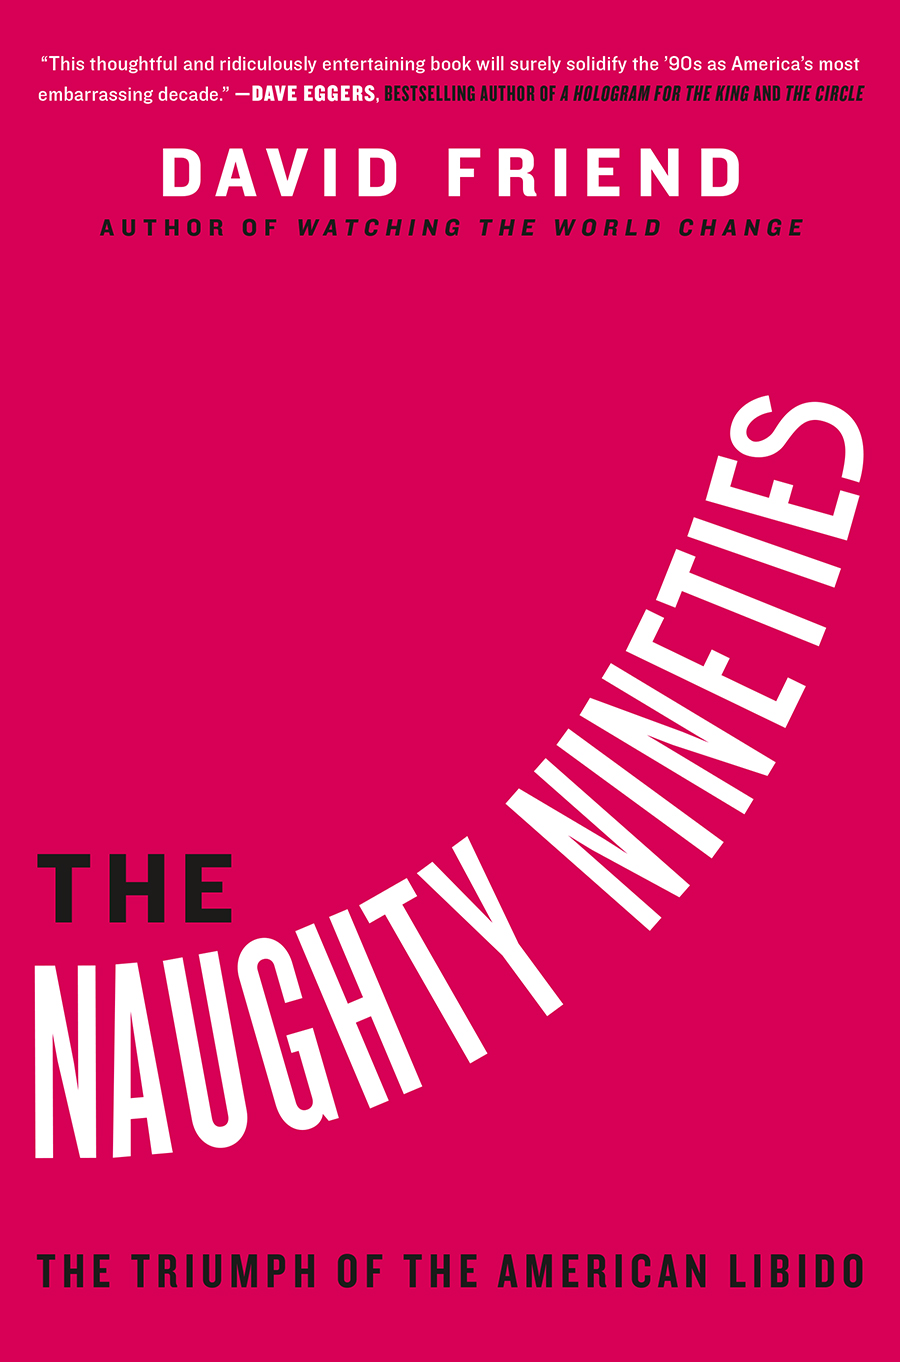 The Naughty Nineties by David Friend | Hachette Book Group